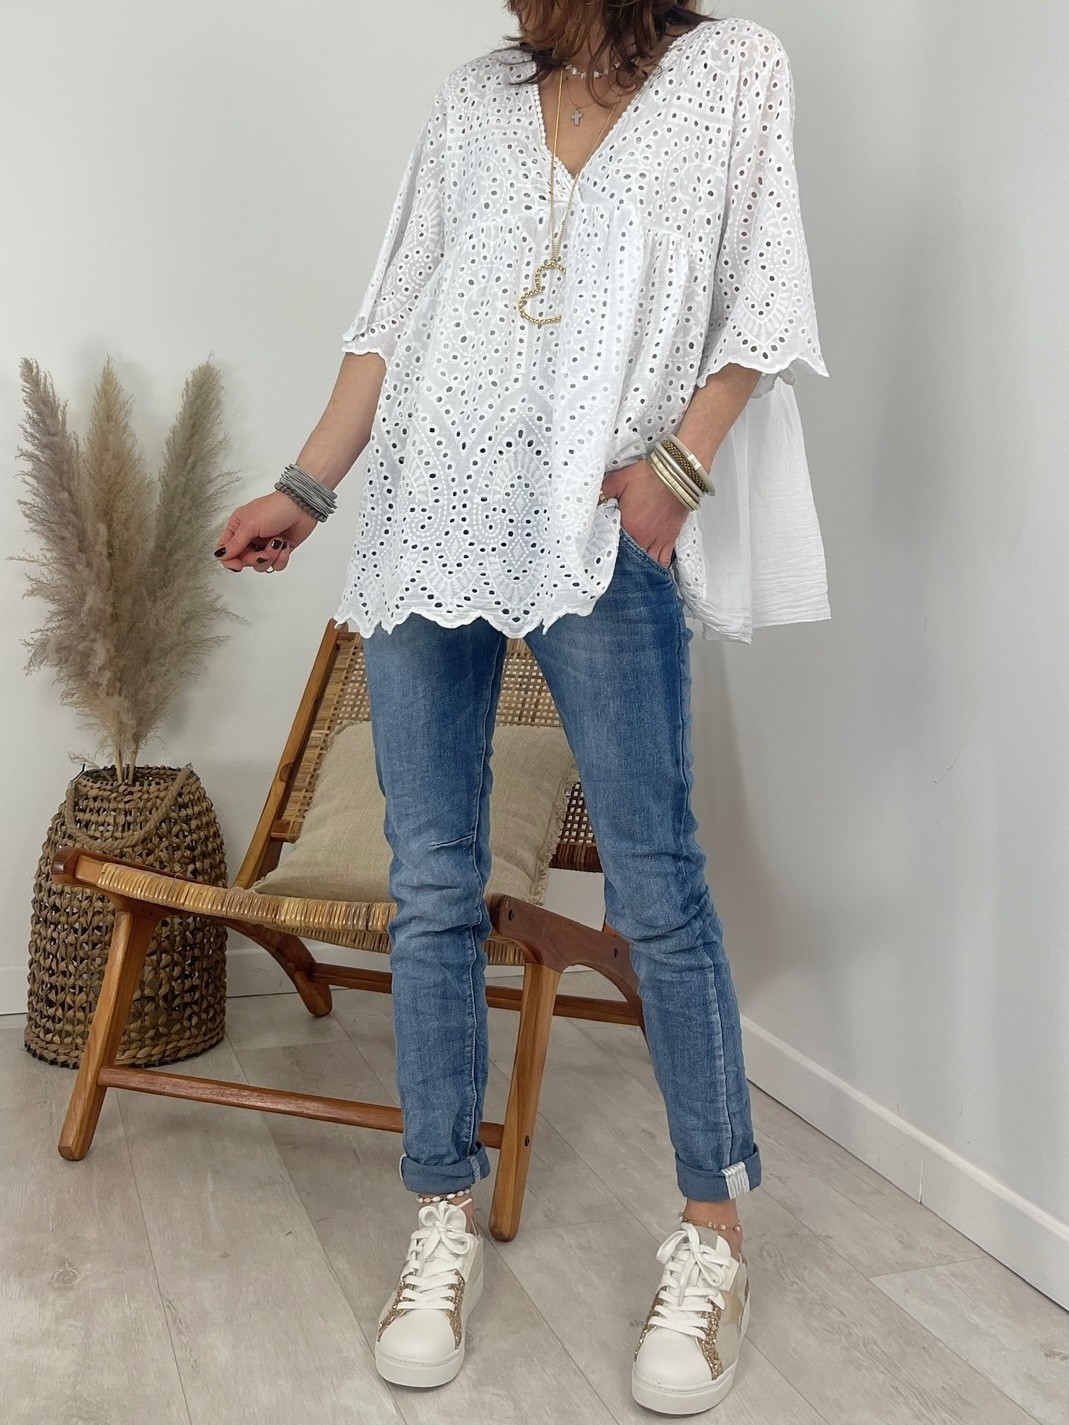 Blouse broderie blanche